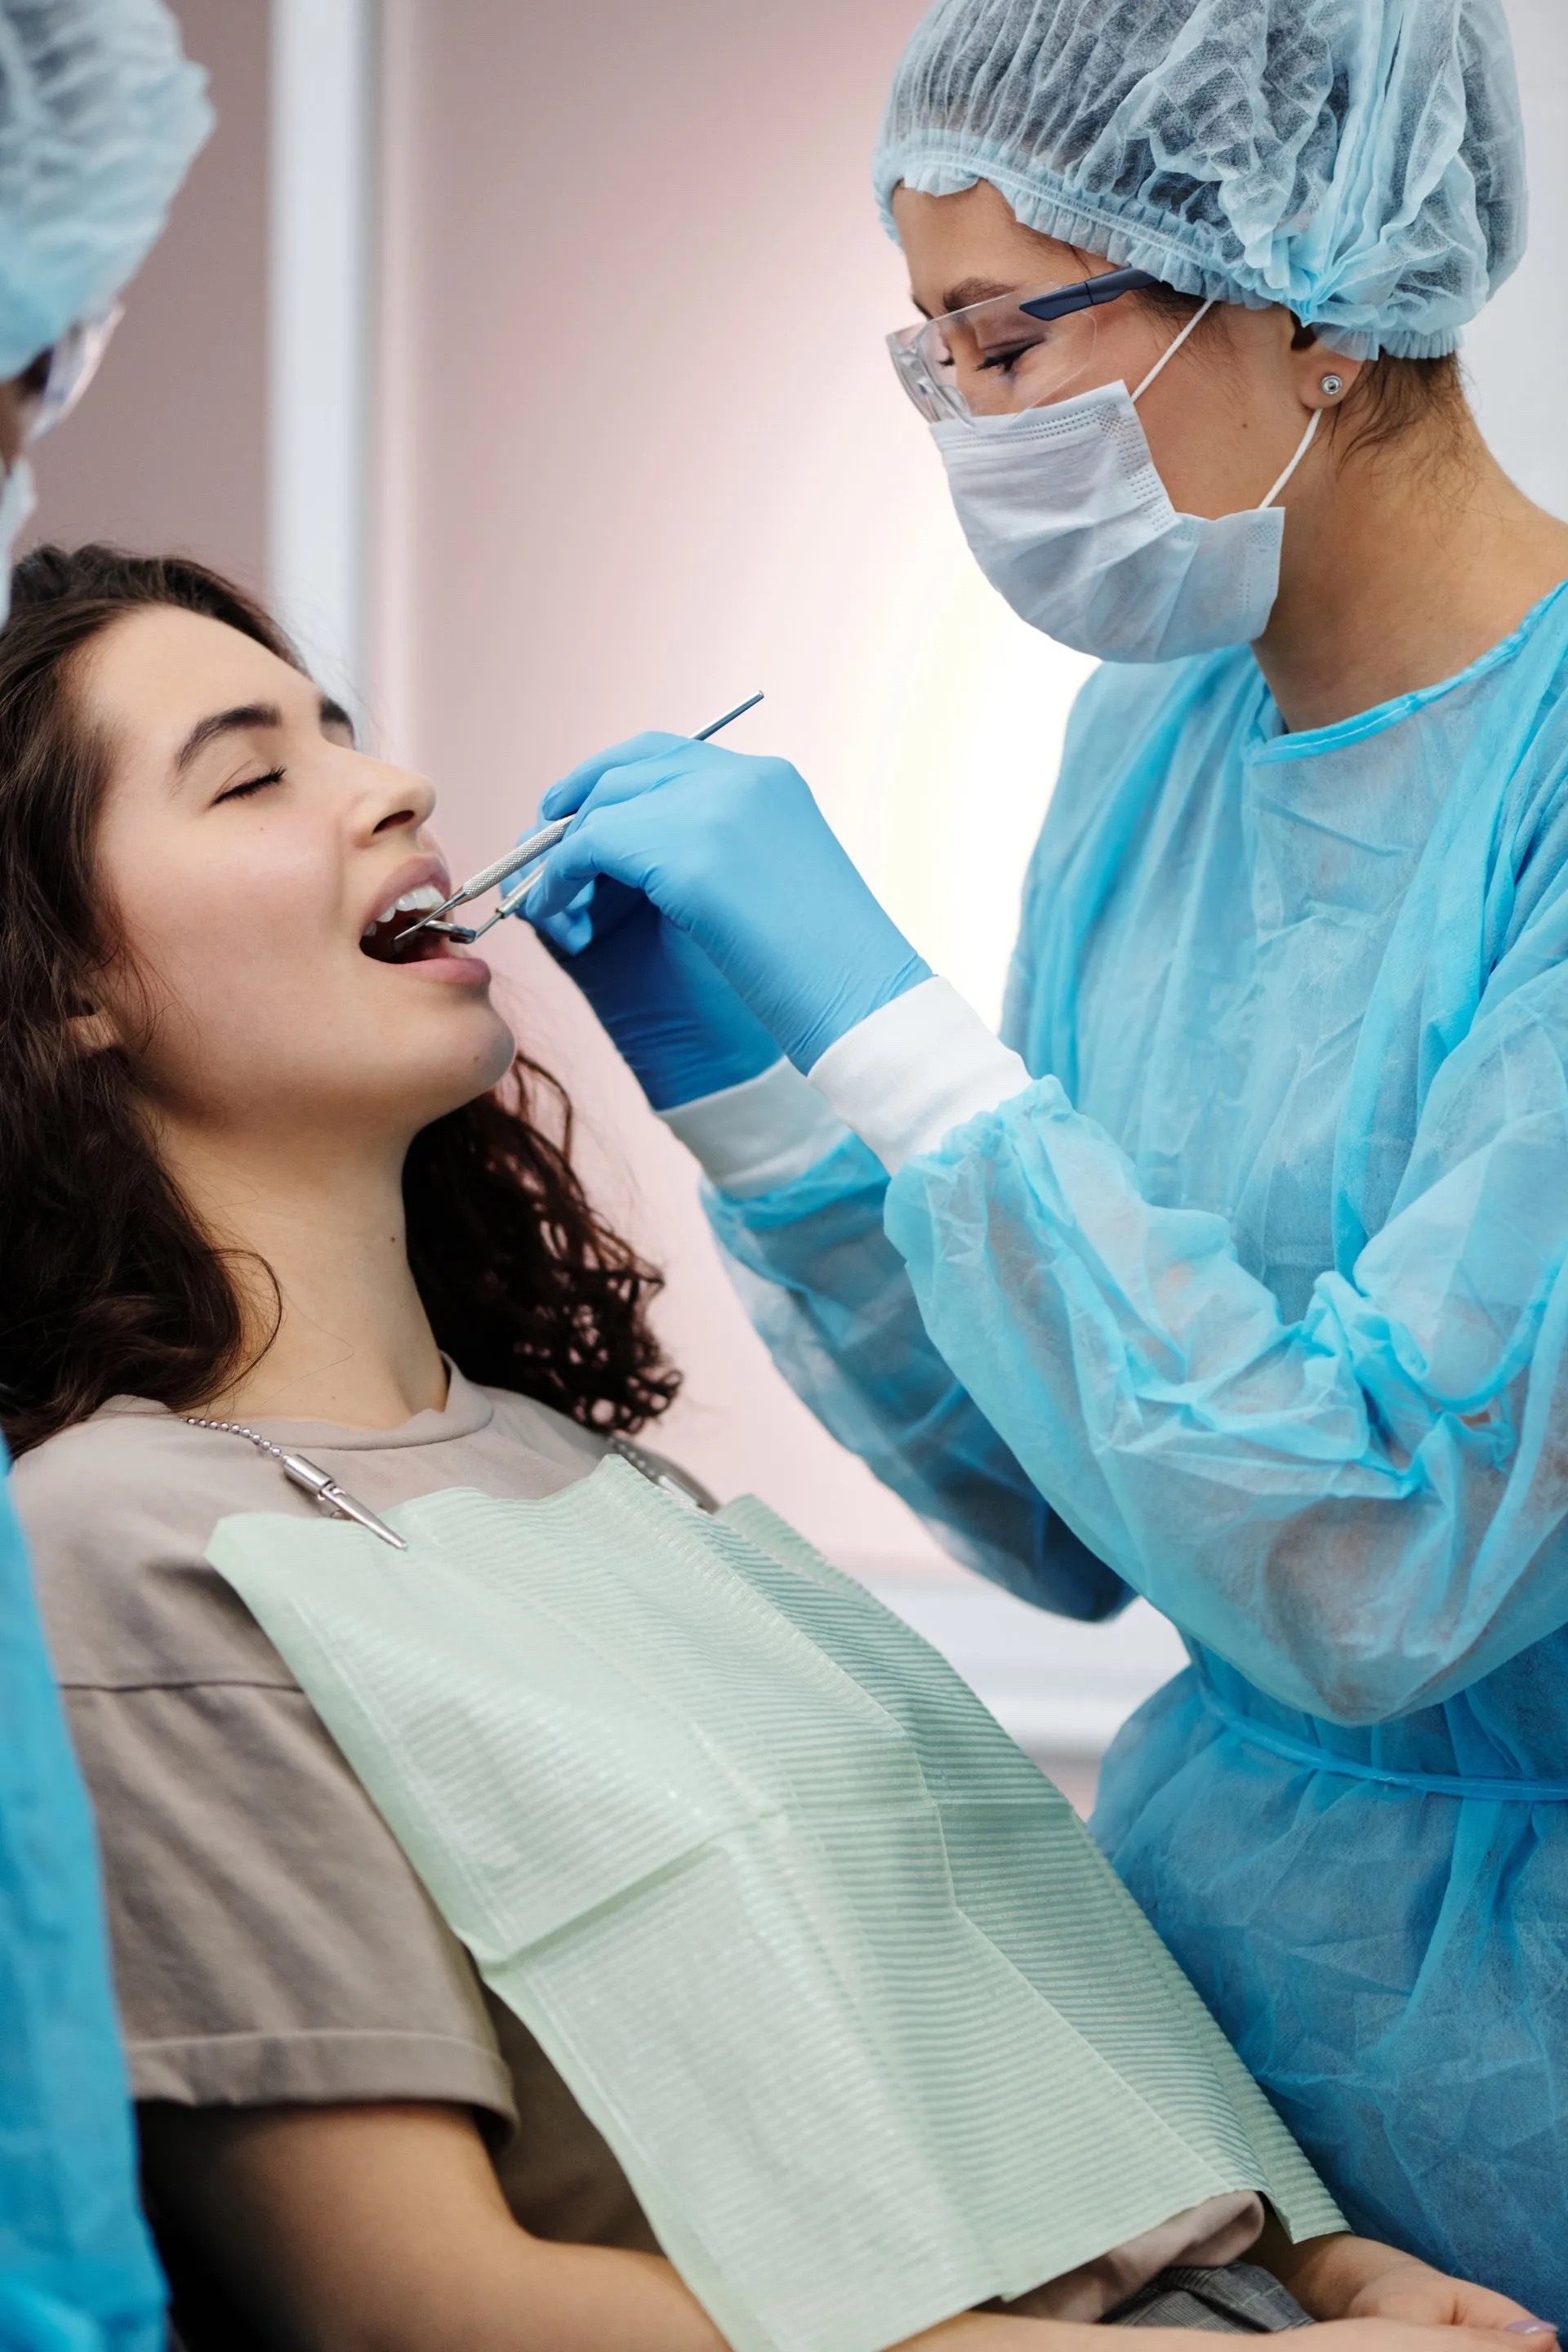 What types of anesthesia does a dentist offer?